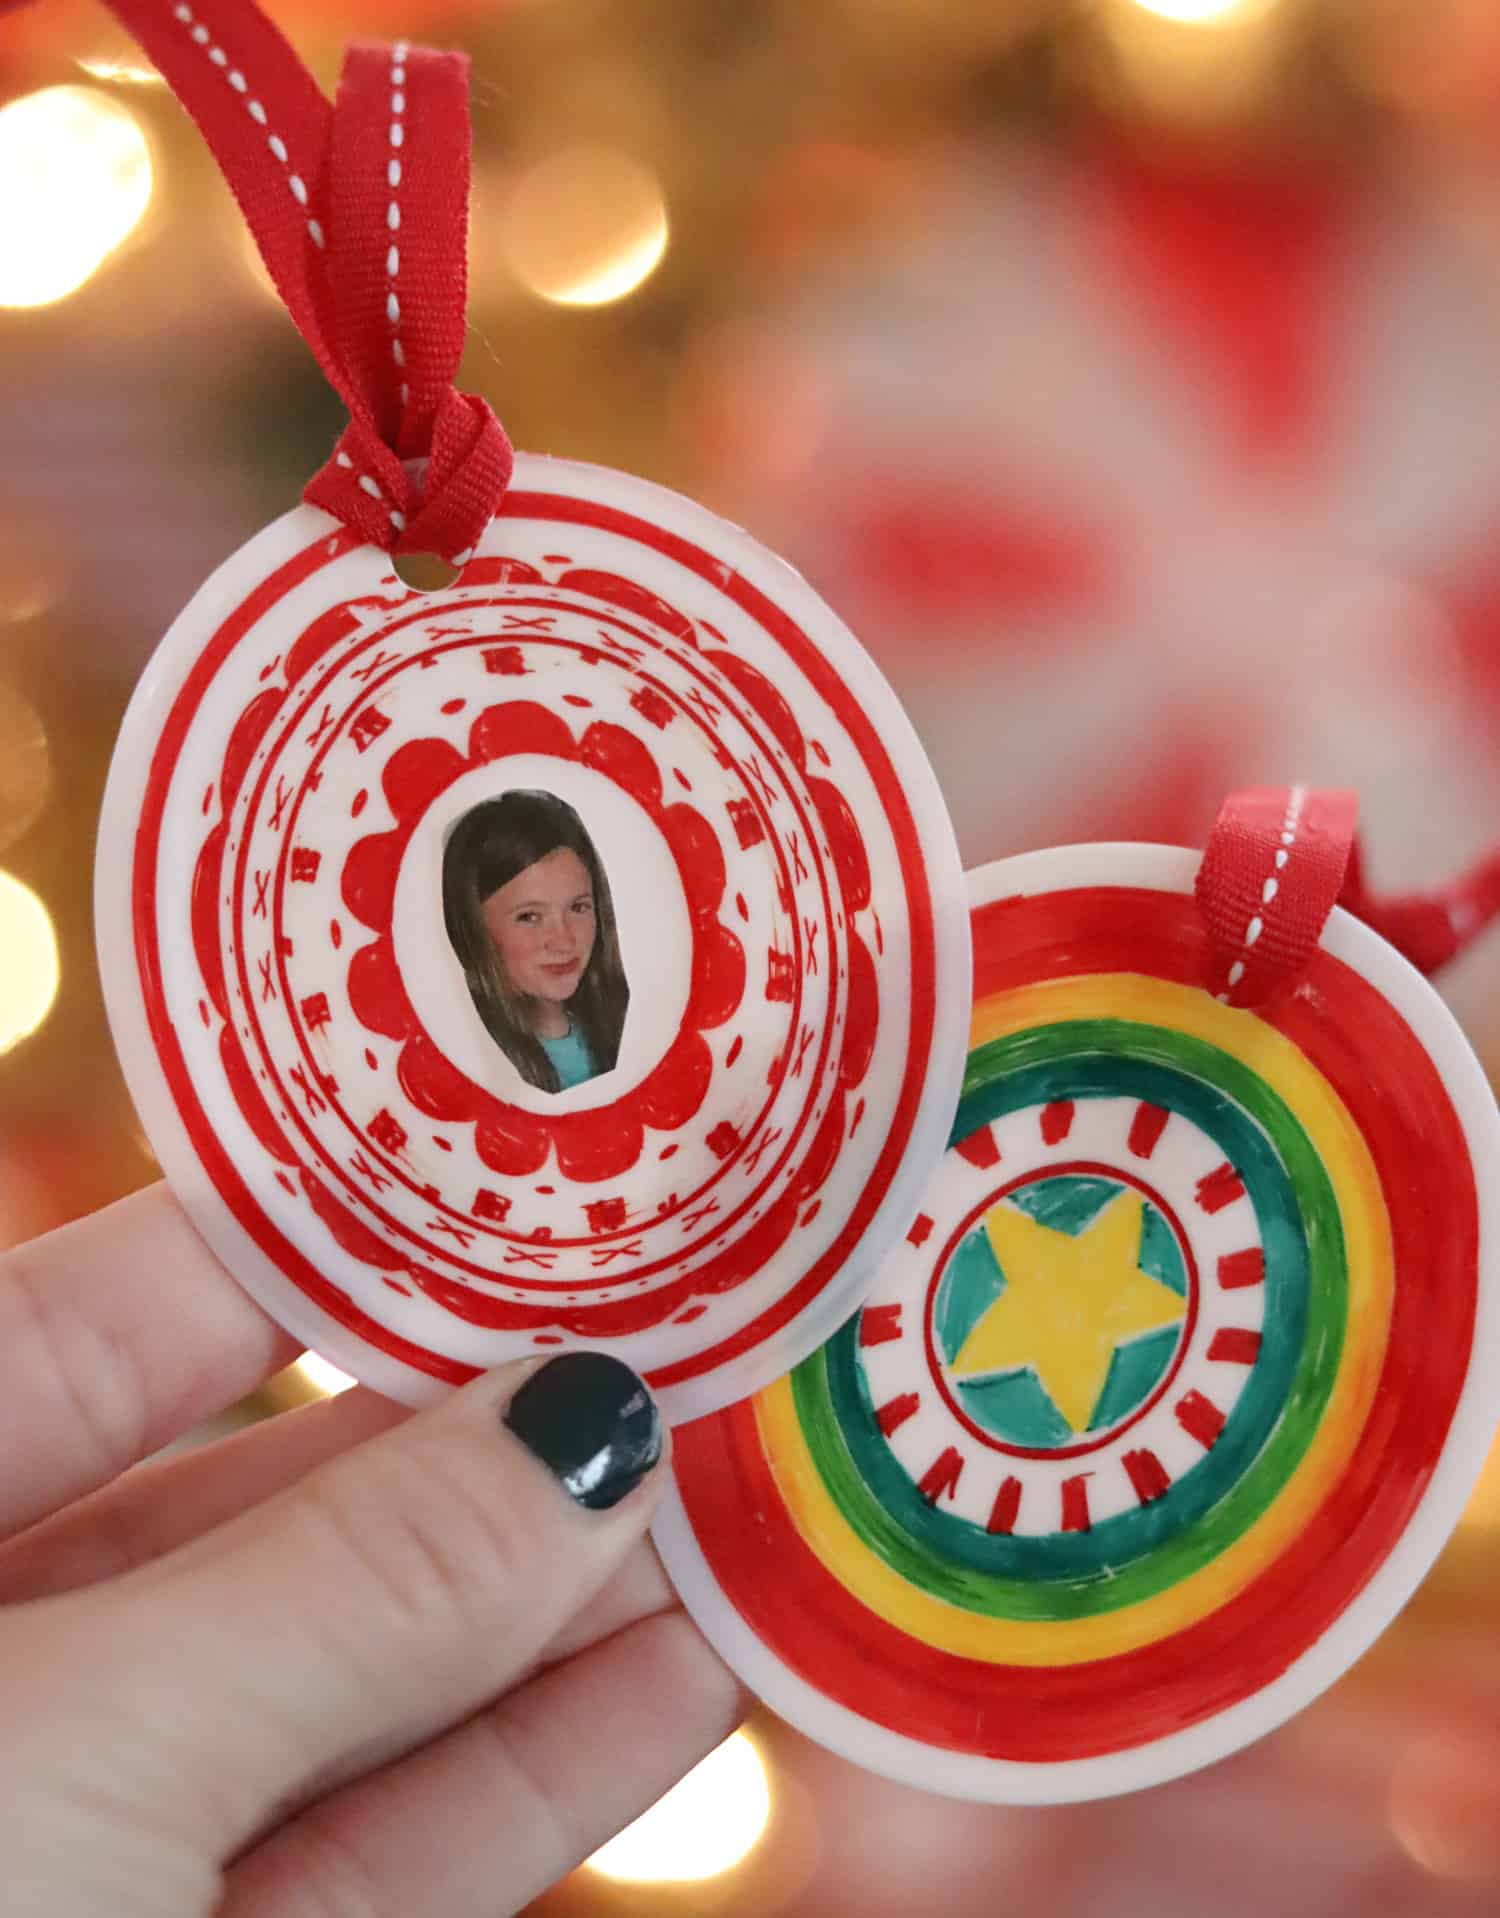 cute kids craft to make custom ornaments for Christmas